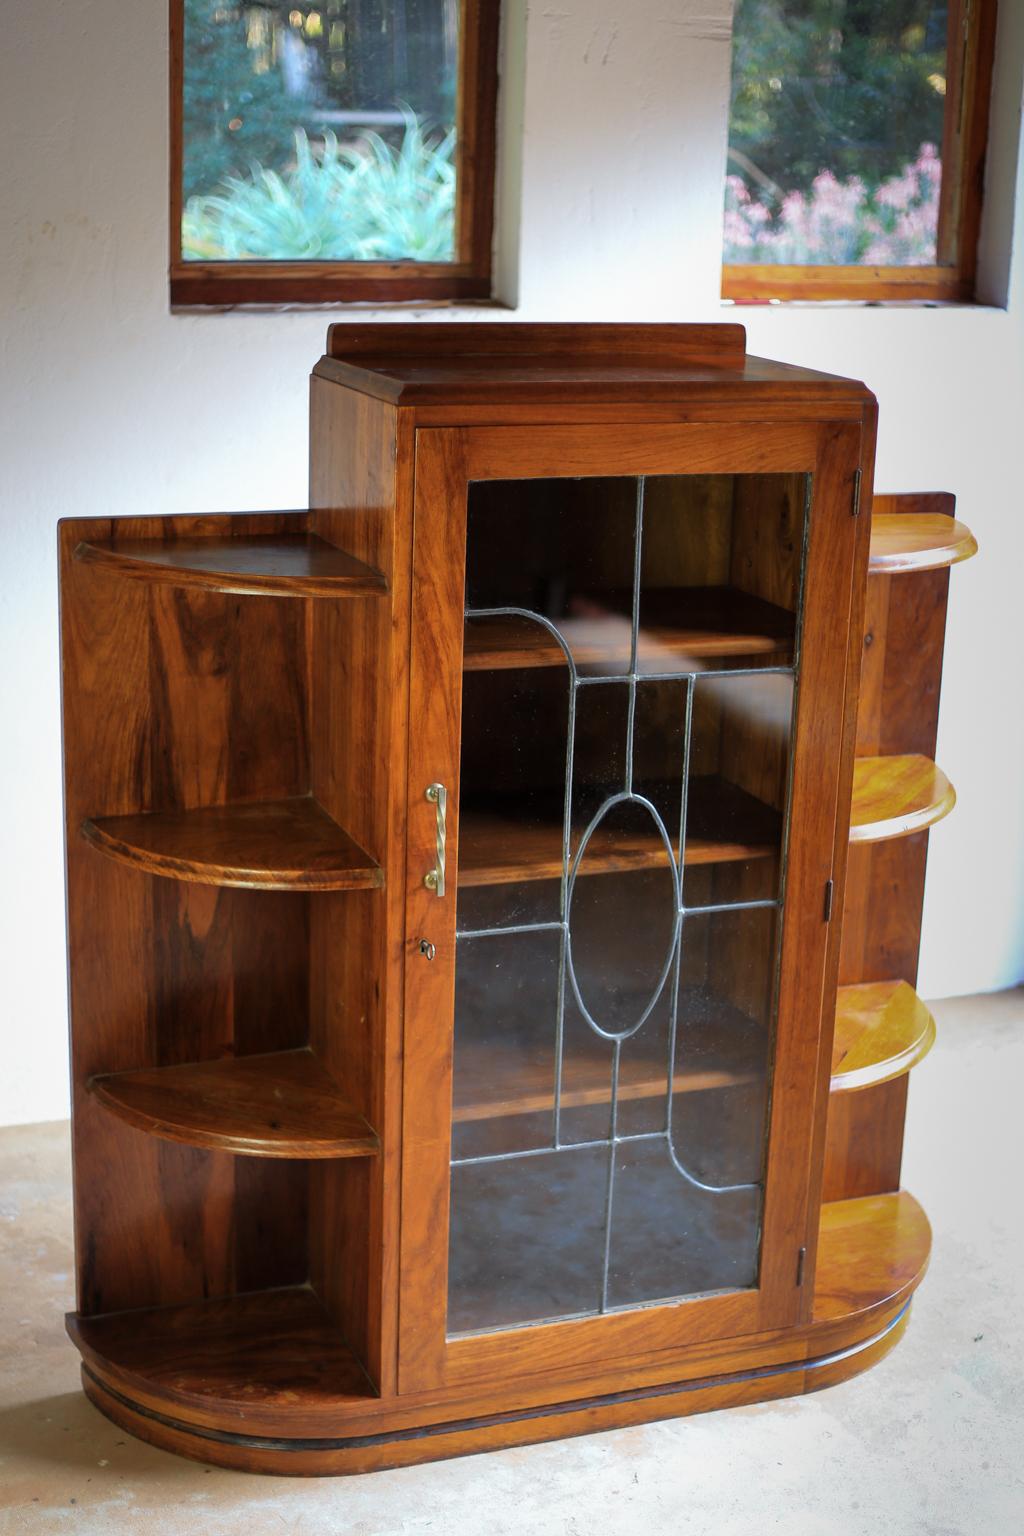 A solid mahogany Art Deco era book case and display cabinet in very good condition. It has a cabinet with three shelves and lead glass door. The cabinet is flanked with two curved open shelving sides. It is a heavy piece crafted with great skill. It